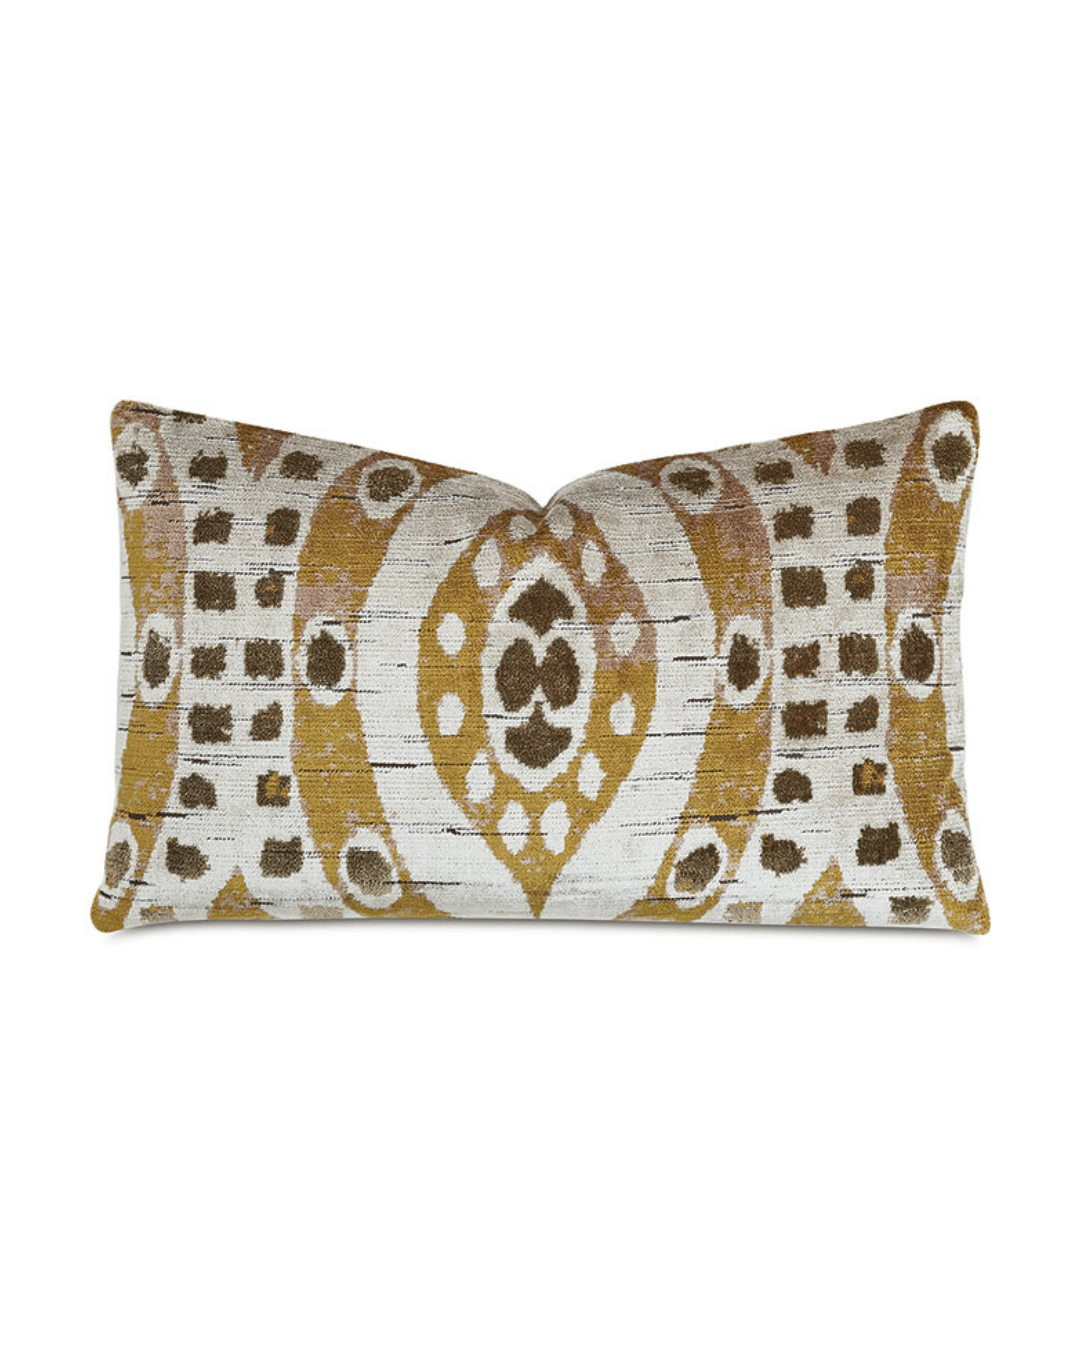 The EARTH TONE VELVET DECORATIVE PILLOW 13x22 by Eastern Accents features a symmetrical, geometric brown and mustard yellow pattern on a light background. The design includes circular and oval shapes, creating an intricate and decorative appearance. This elegant piece adds a touch of earth tones with its deluxe down feather insert.